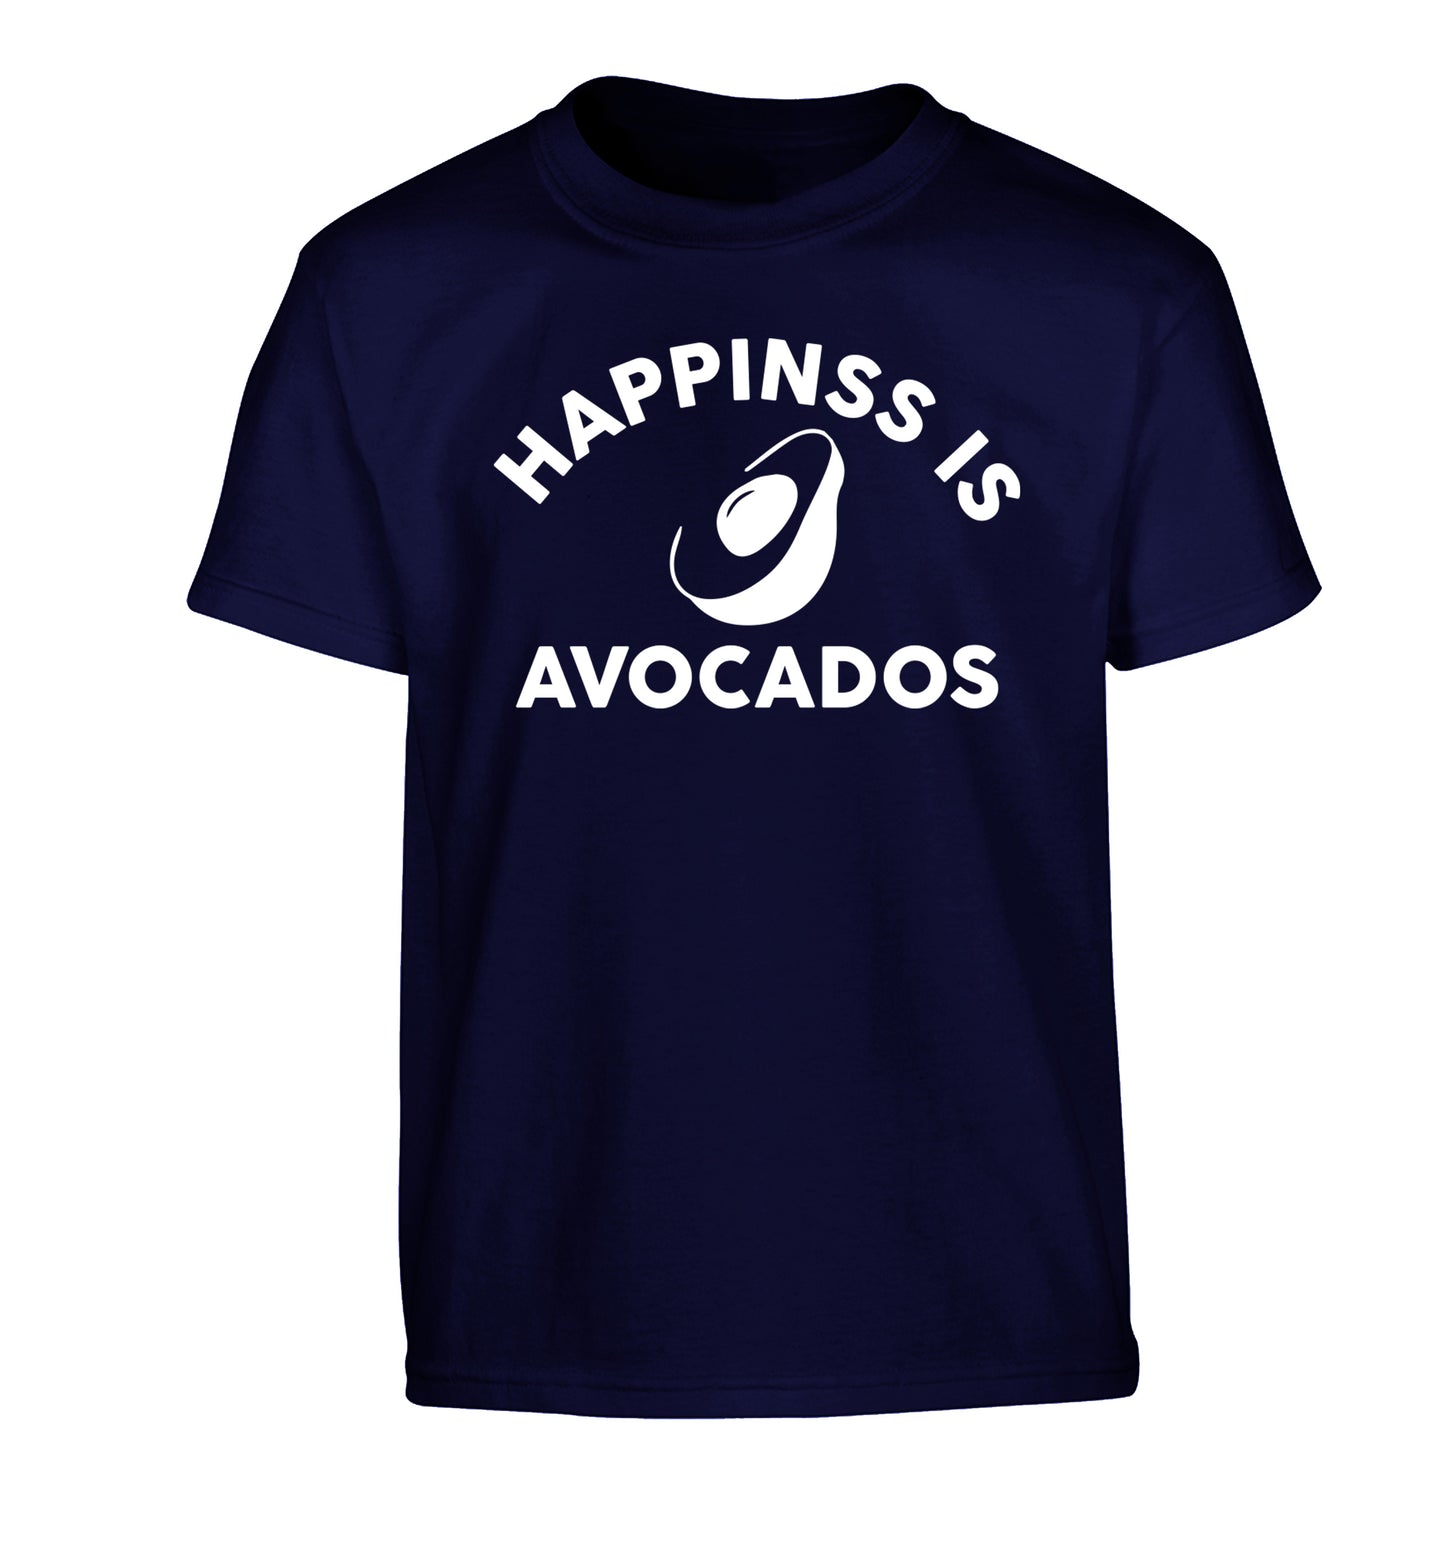 Happiness is avocados Children's navy Tshirt 12-14 Years